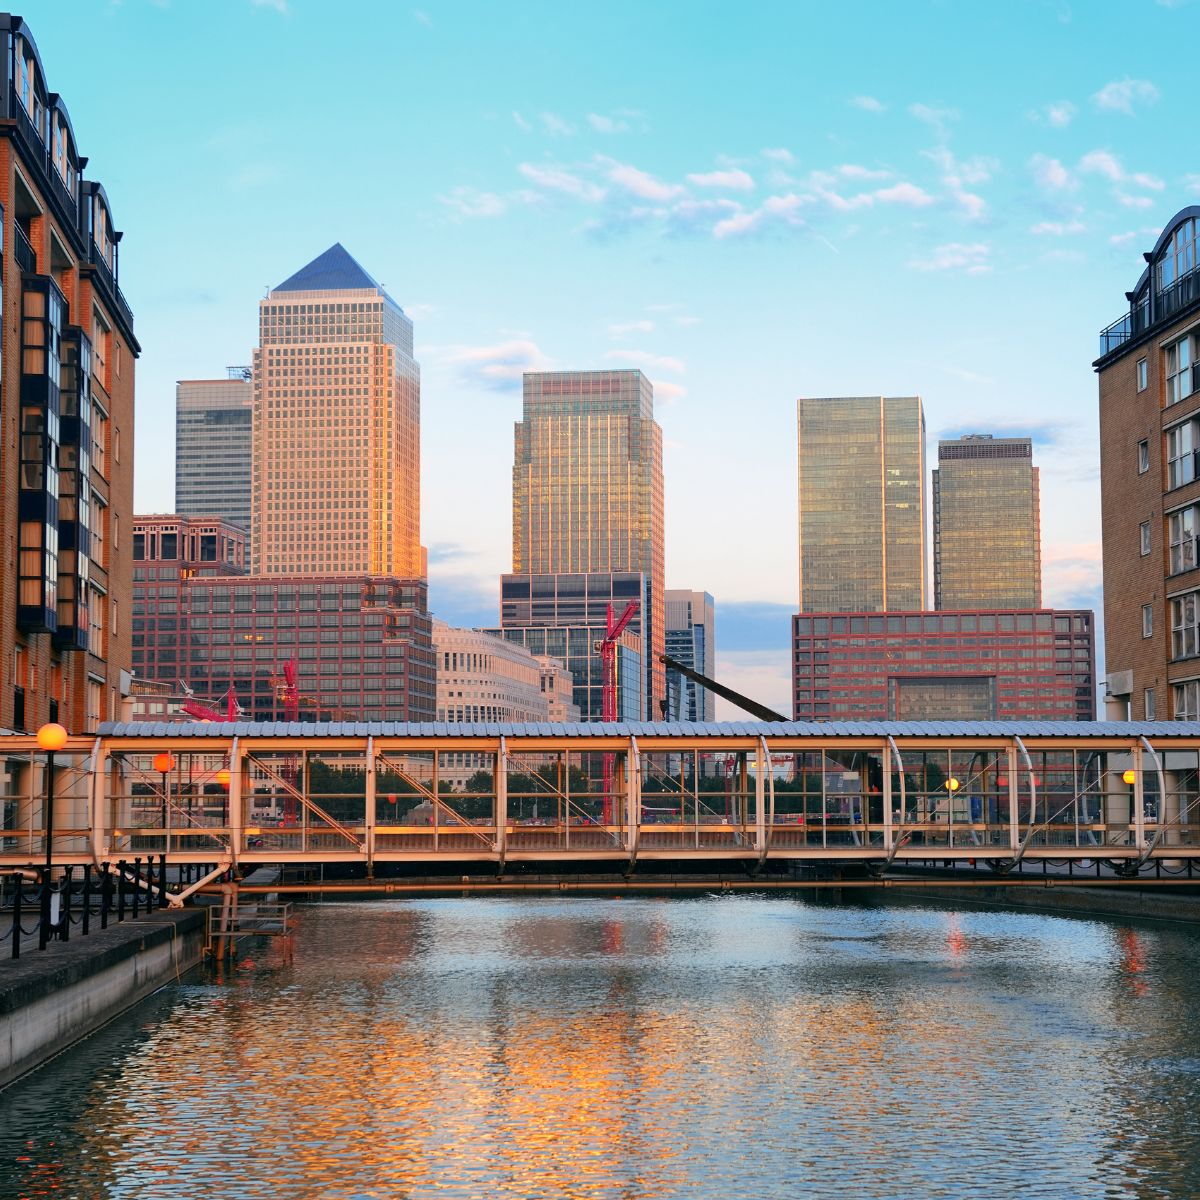 A view of Canary Wharf with a bridge over the water and tall buildings in the background.